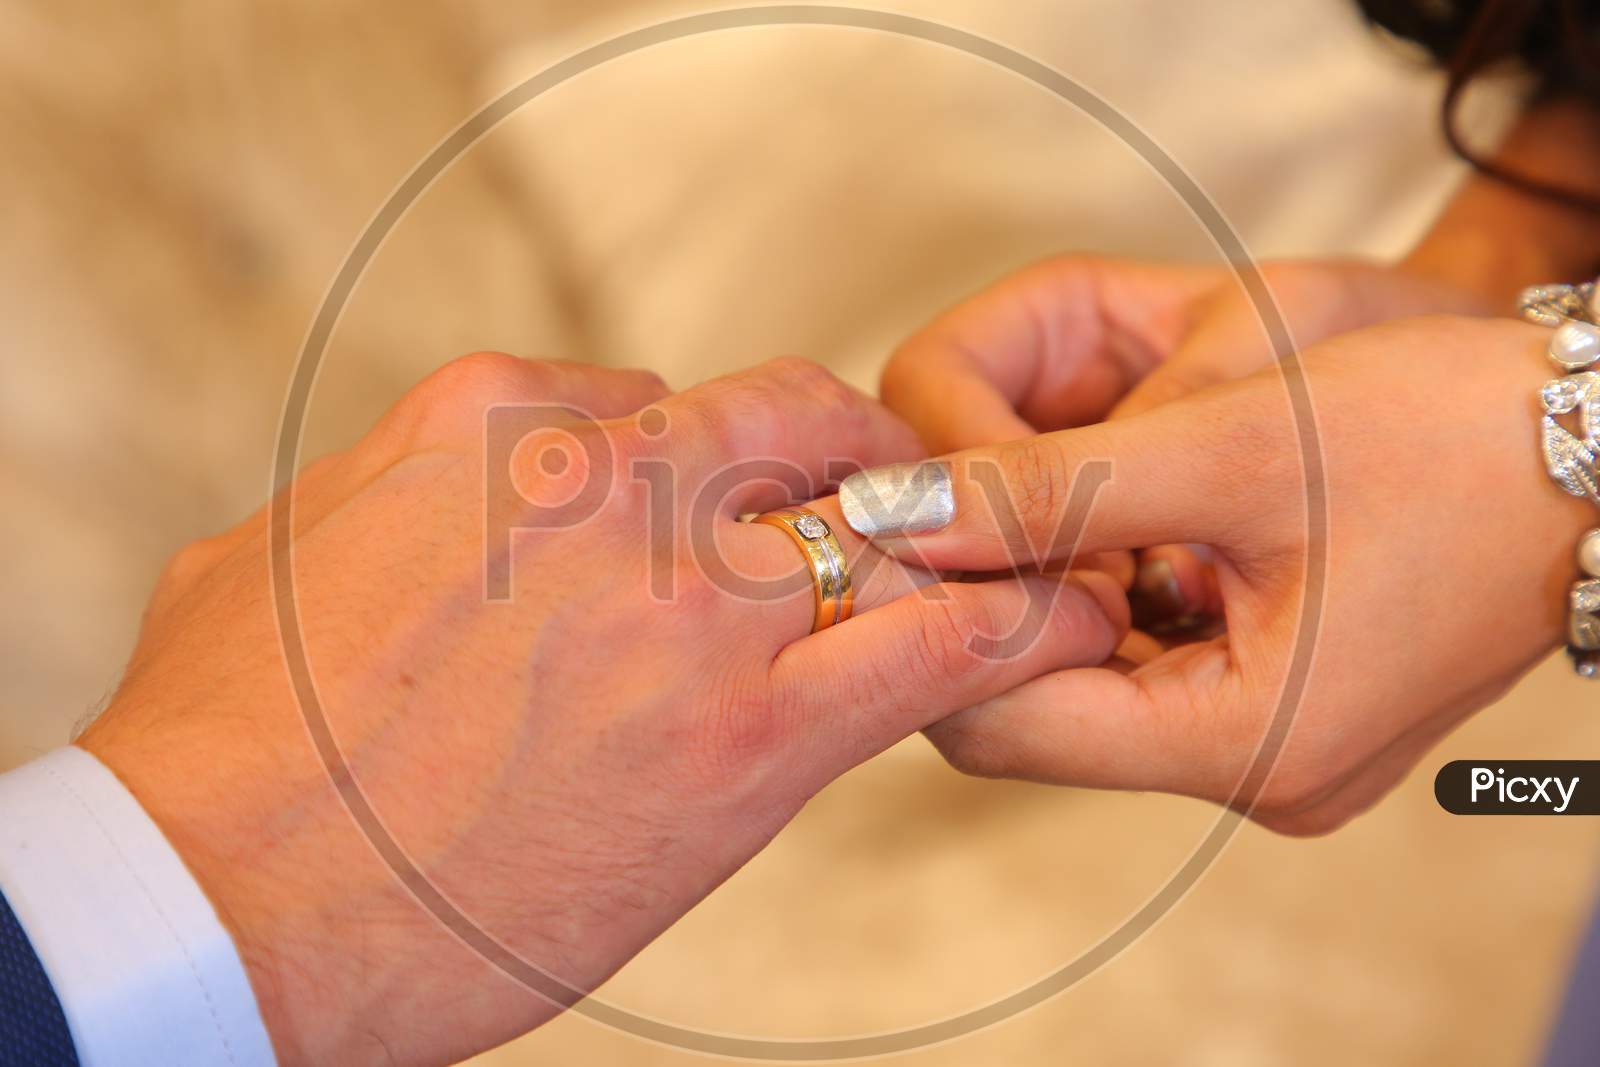 Download Couple Hand In Hand Images 64 Hd Pictures And Stock Photos